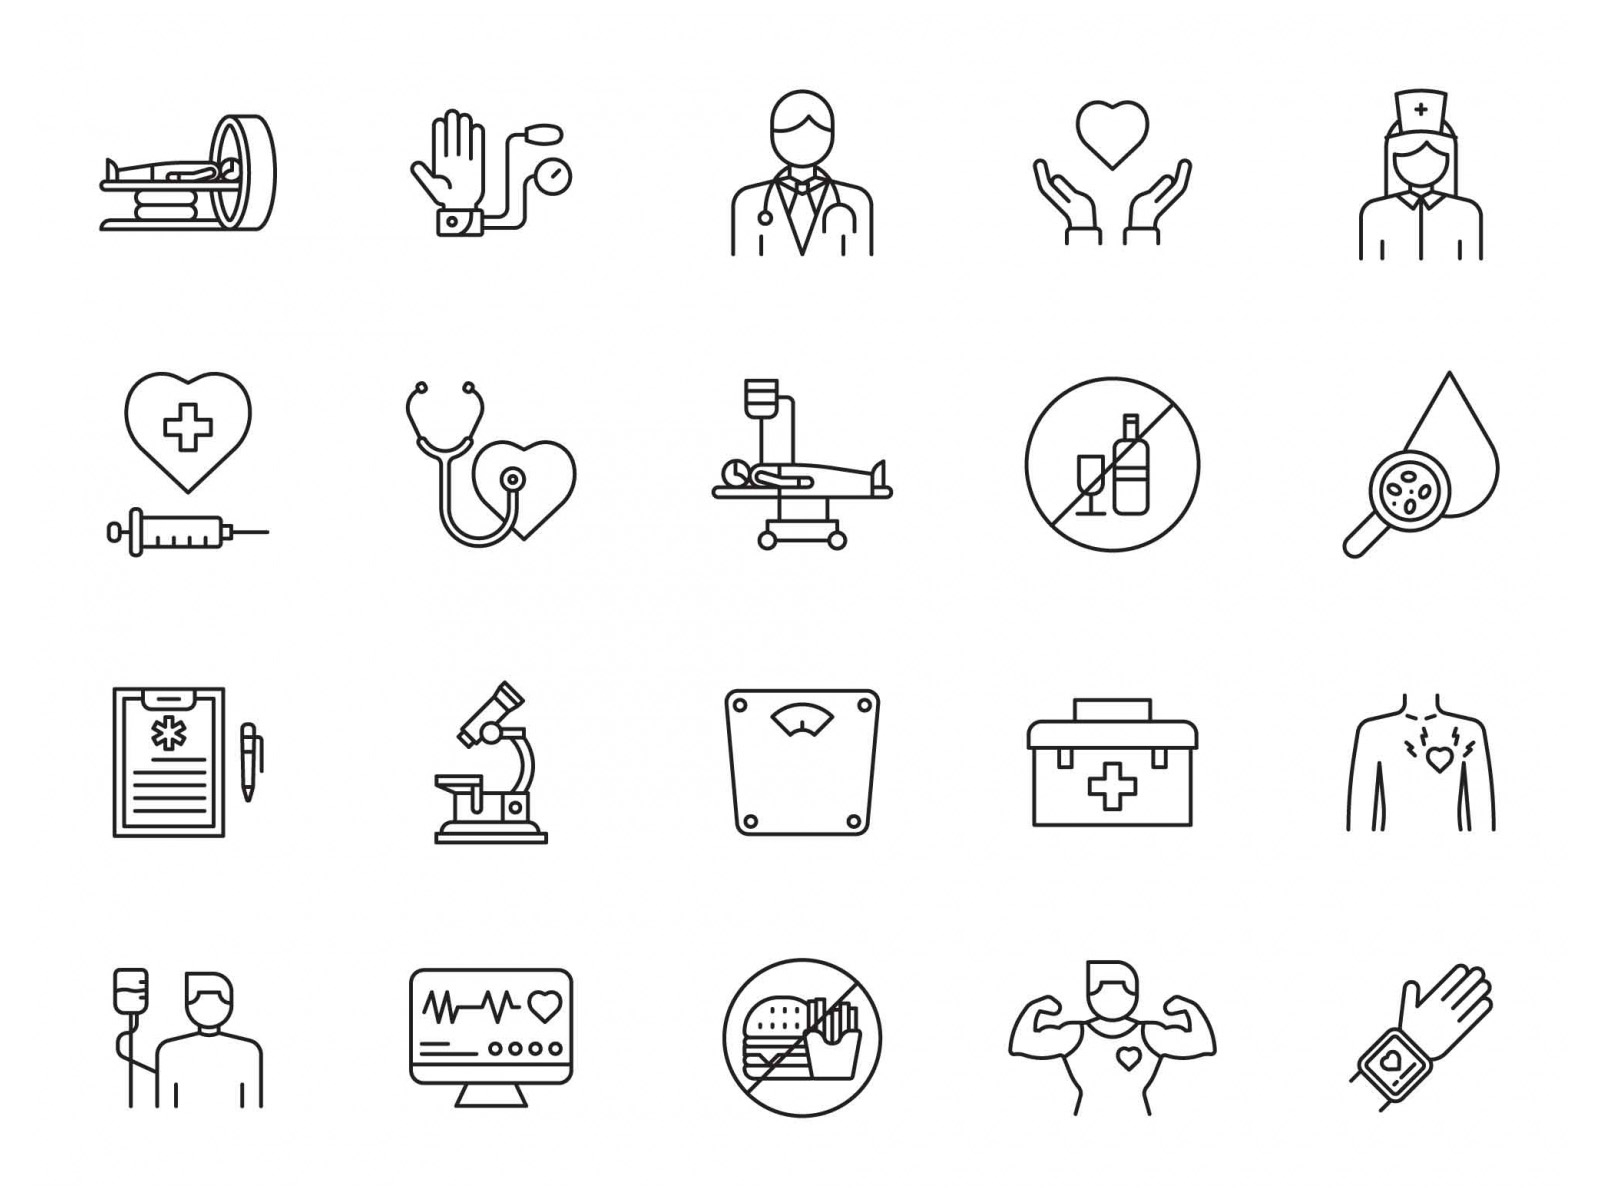 Cardiology Vector Icons by Graphic Pear on Dribbble